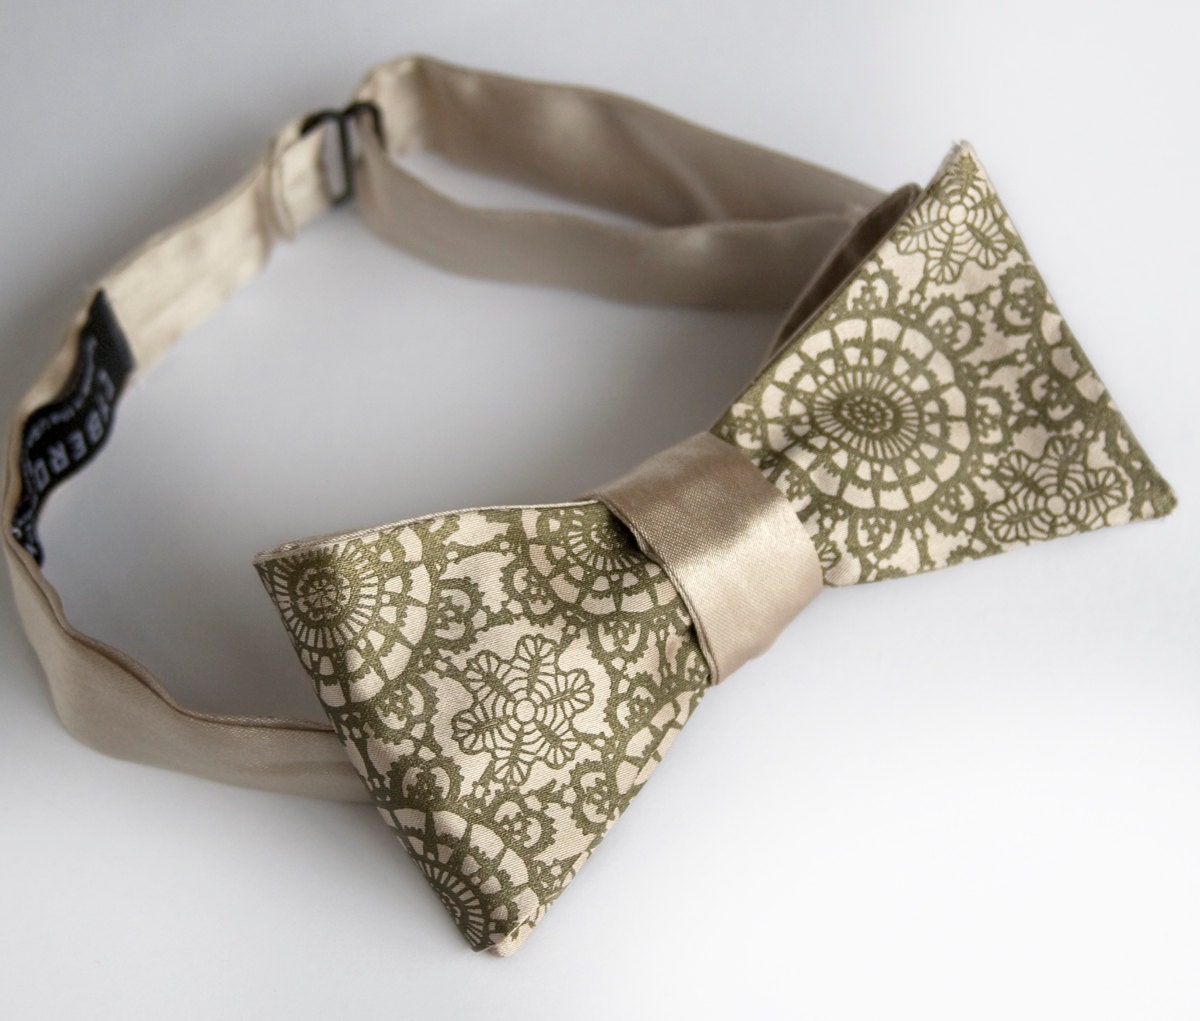 Cottage Lace khaki bow tie. Self-tie, freestyle mens bow tie. Silkscreened antique brass print.